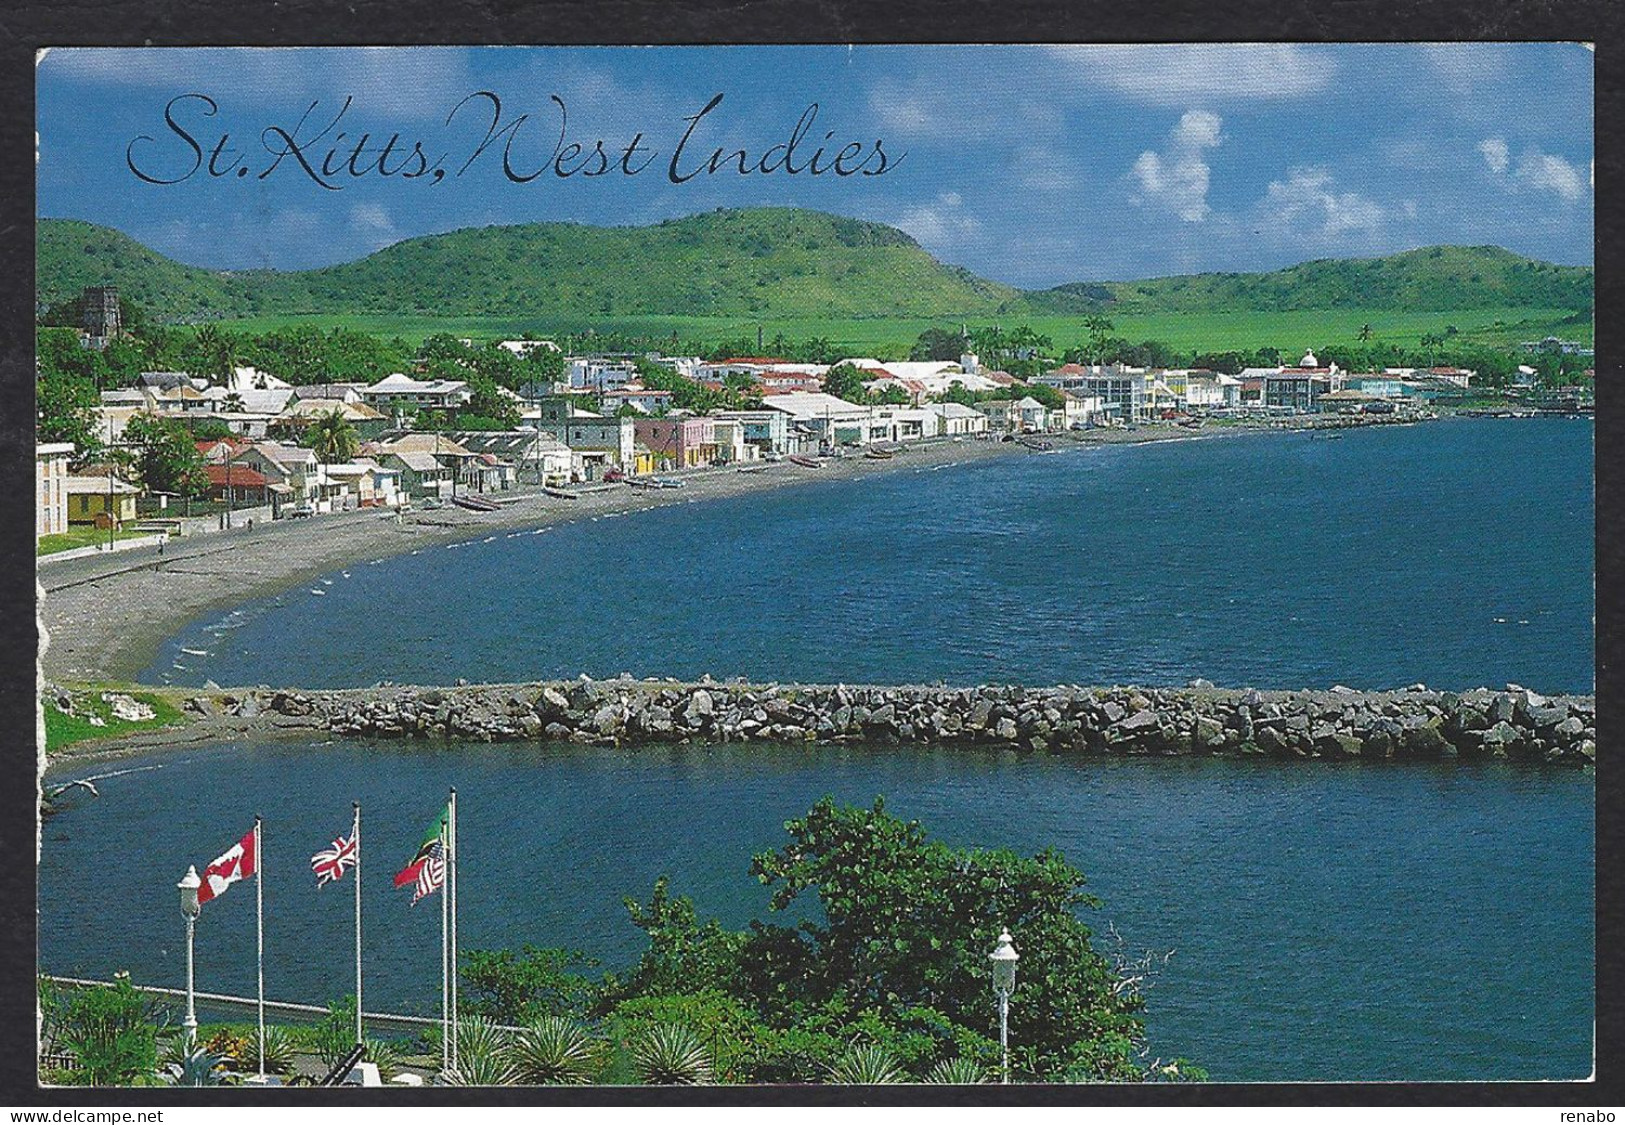 Antille - St. Kitts, West Indies 1993; Green Hills And Blue Ocean In Basseterre, Colline Verdi Oceano Blu; To Italy. - Saint Kitts And Nevis